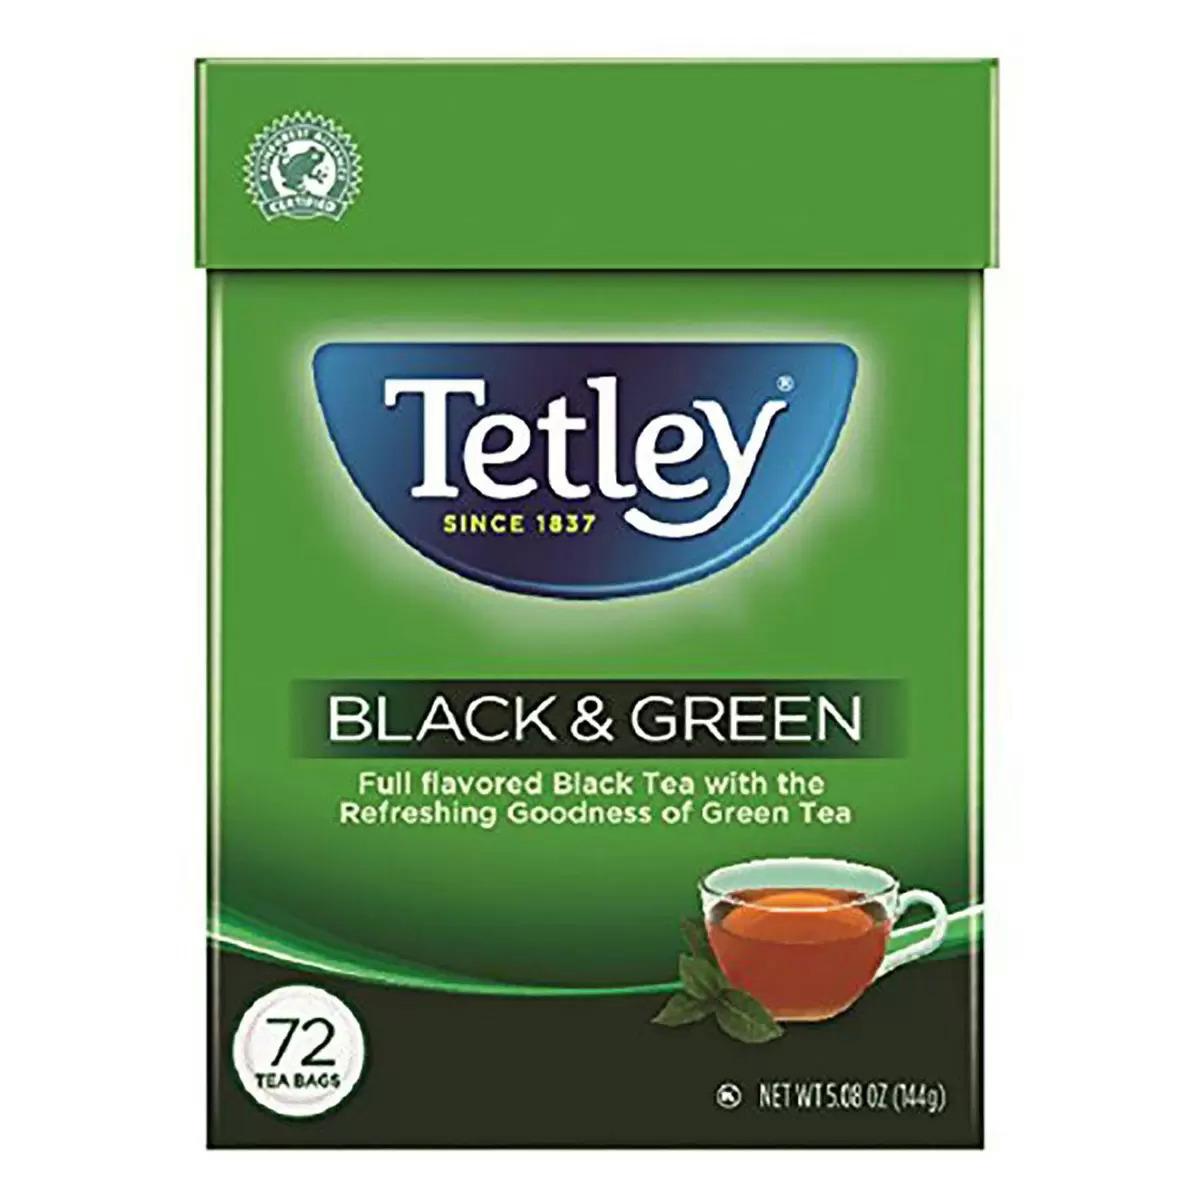 72 Tetley Black and Green Tea Bags for $2.83 Shipped